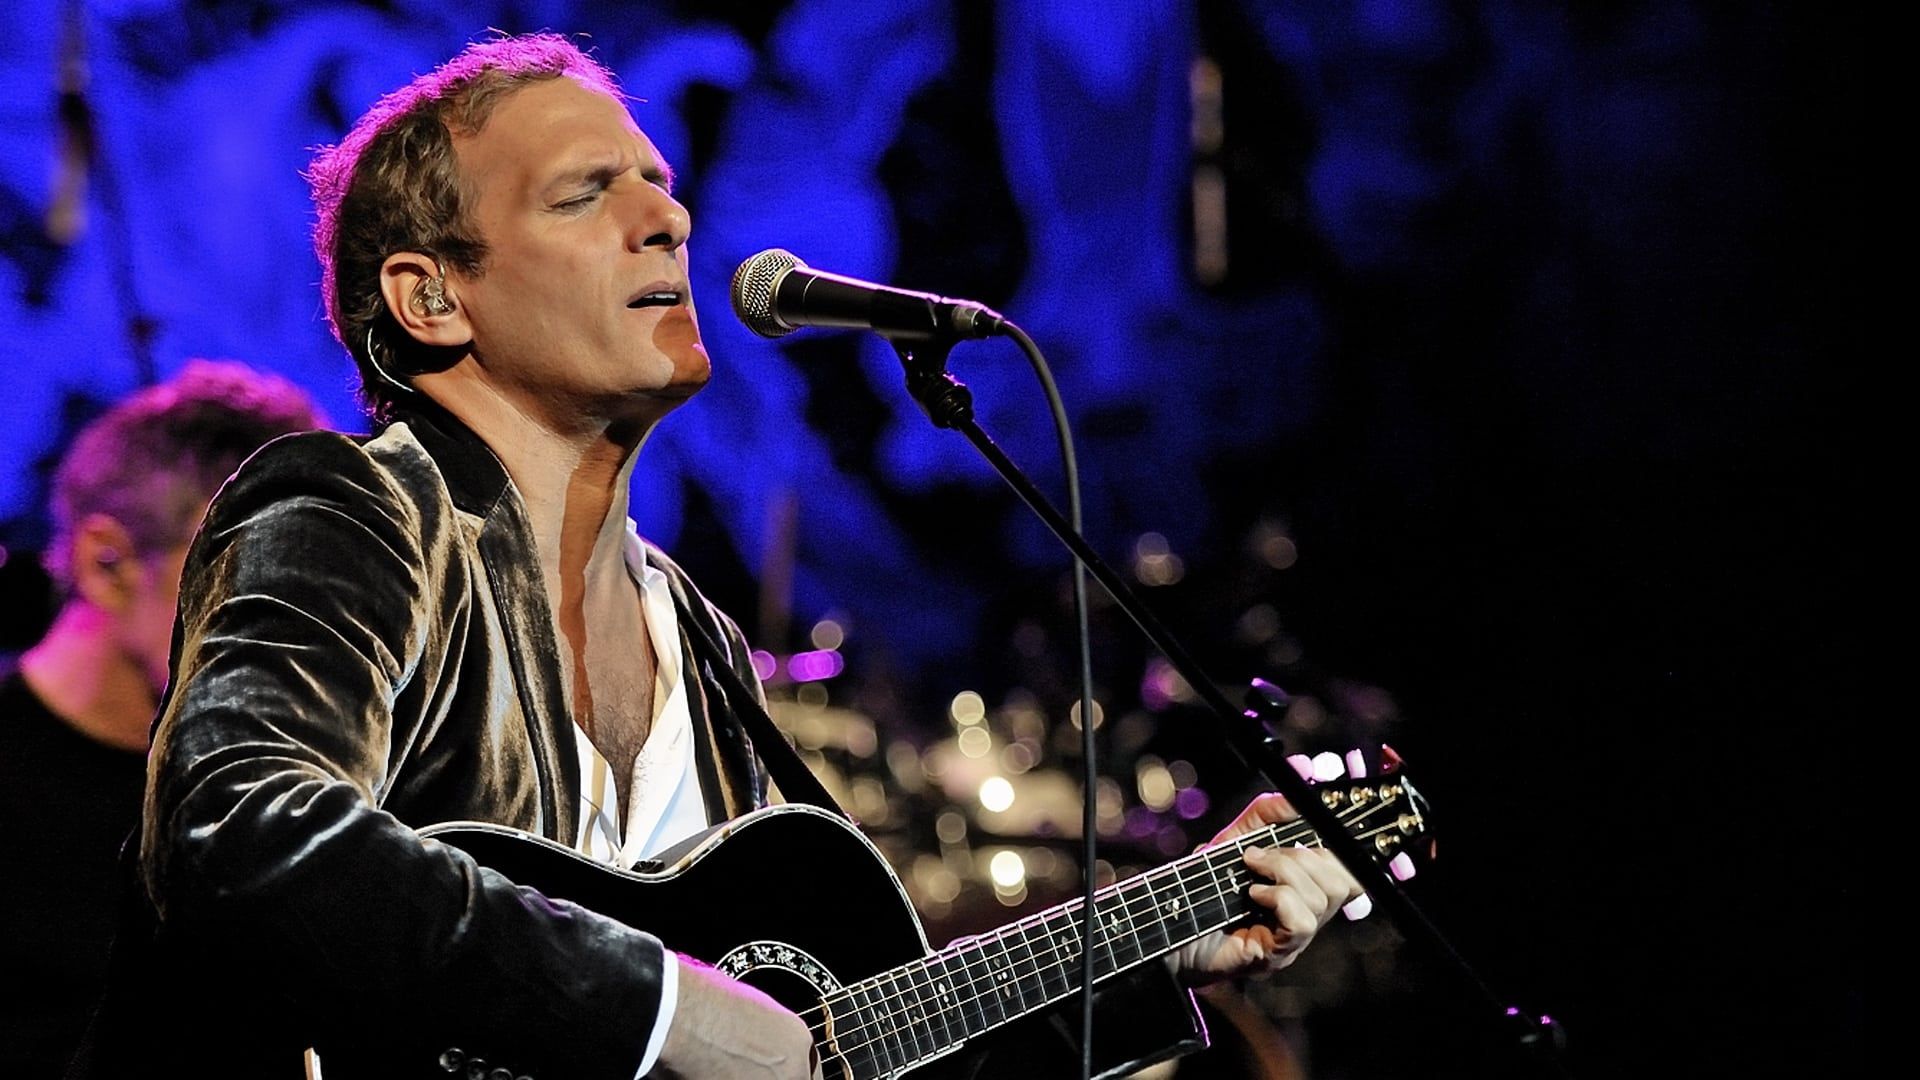 Michael Bolton Live at the Royal Albert Hall background